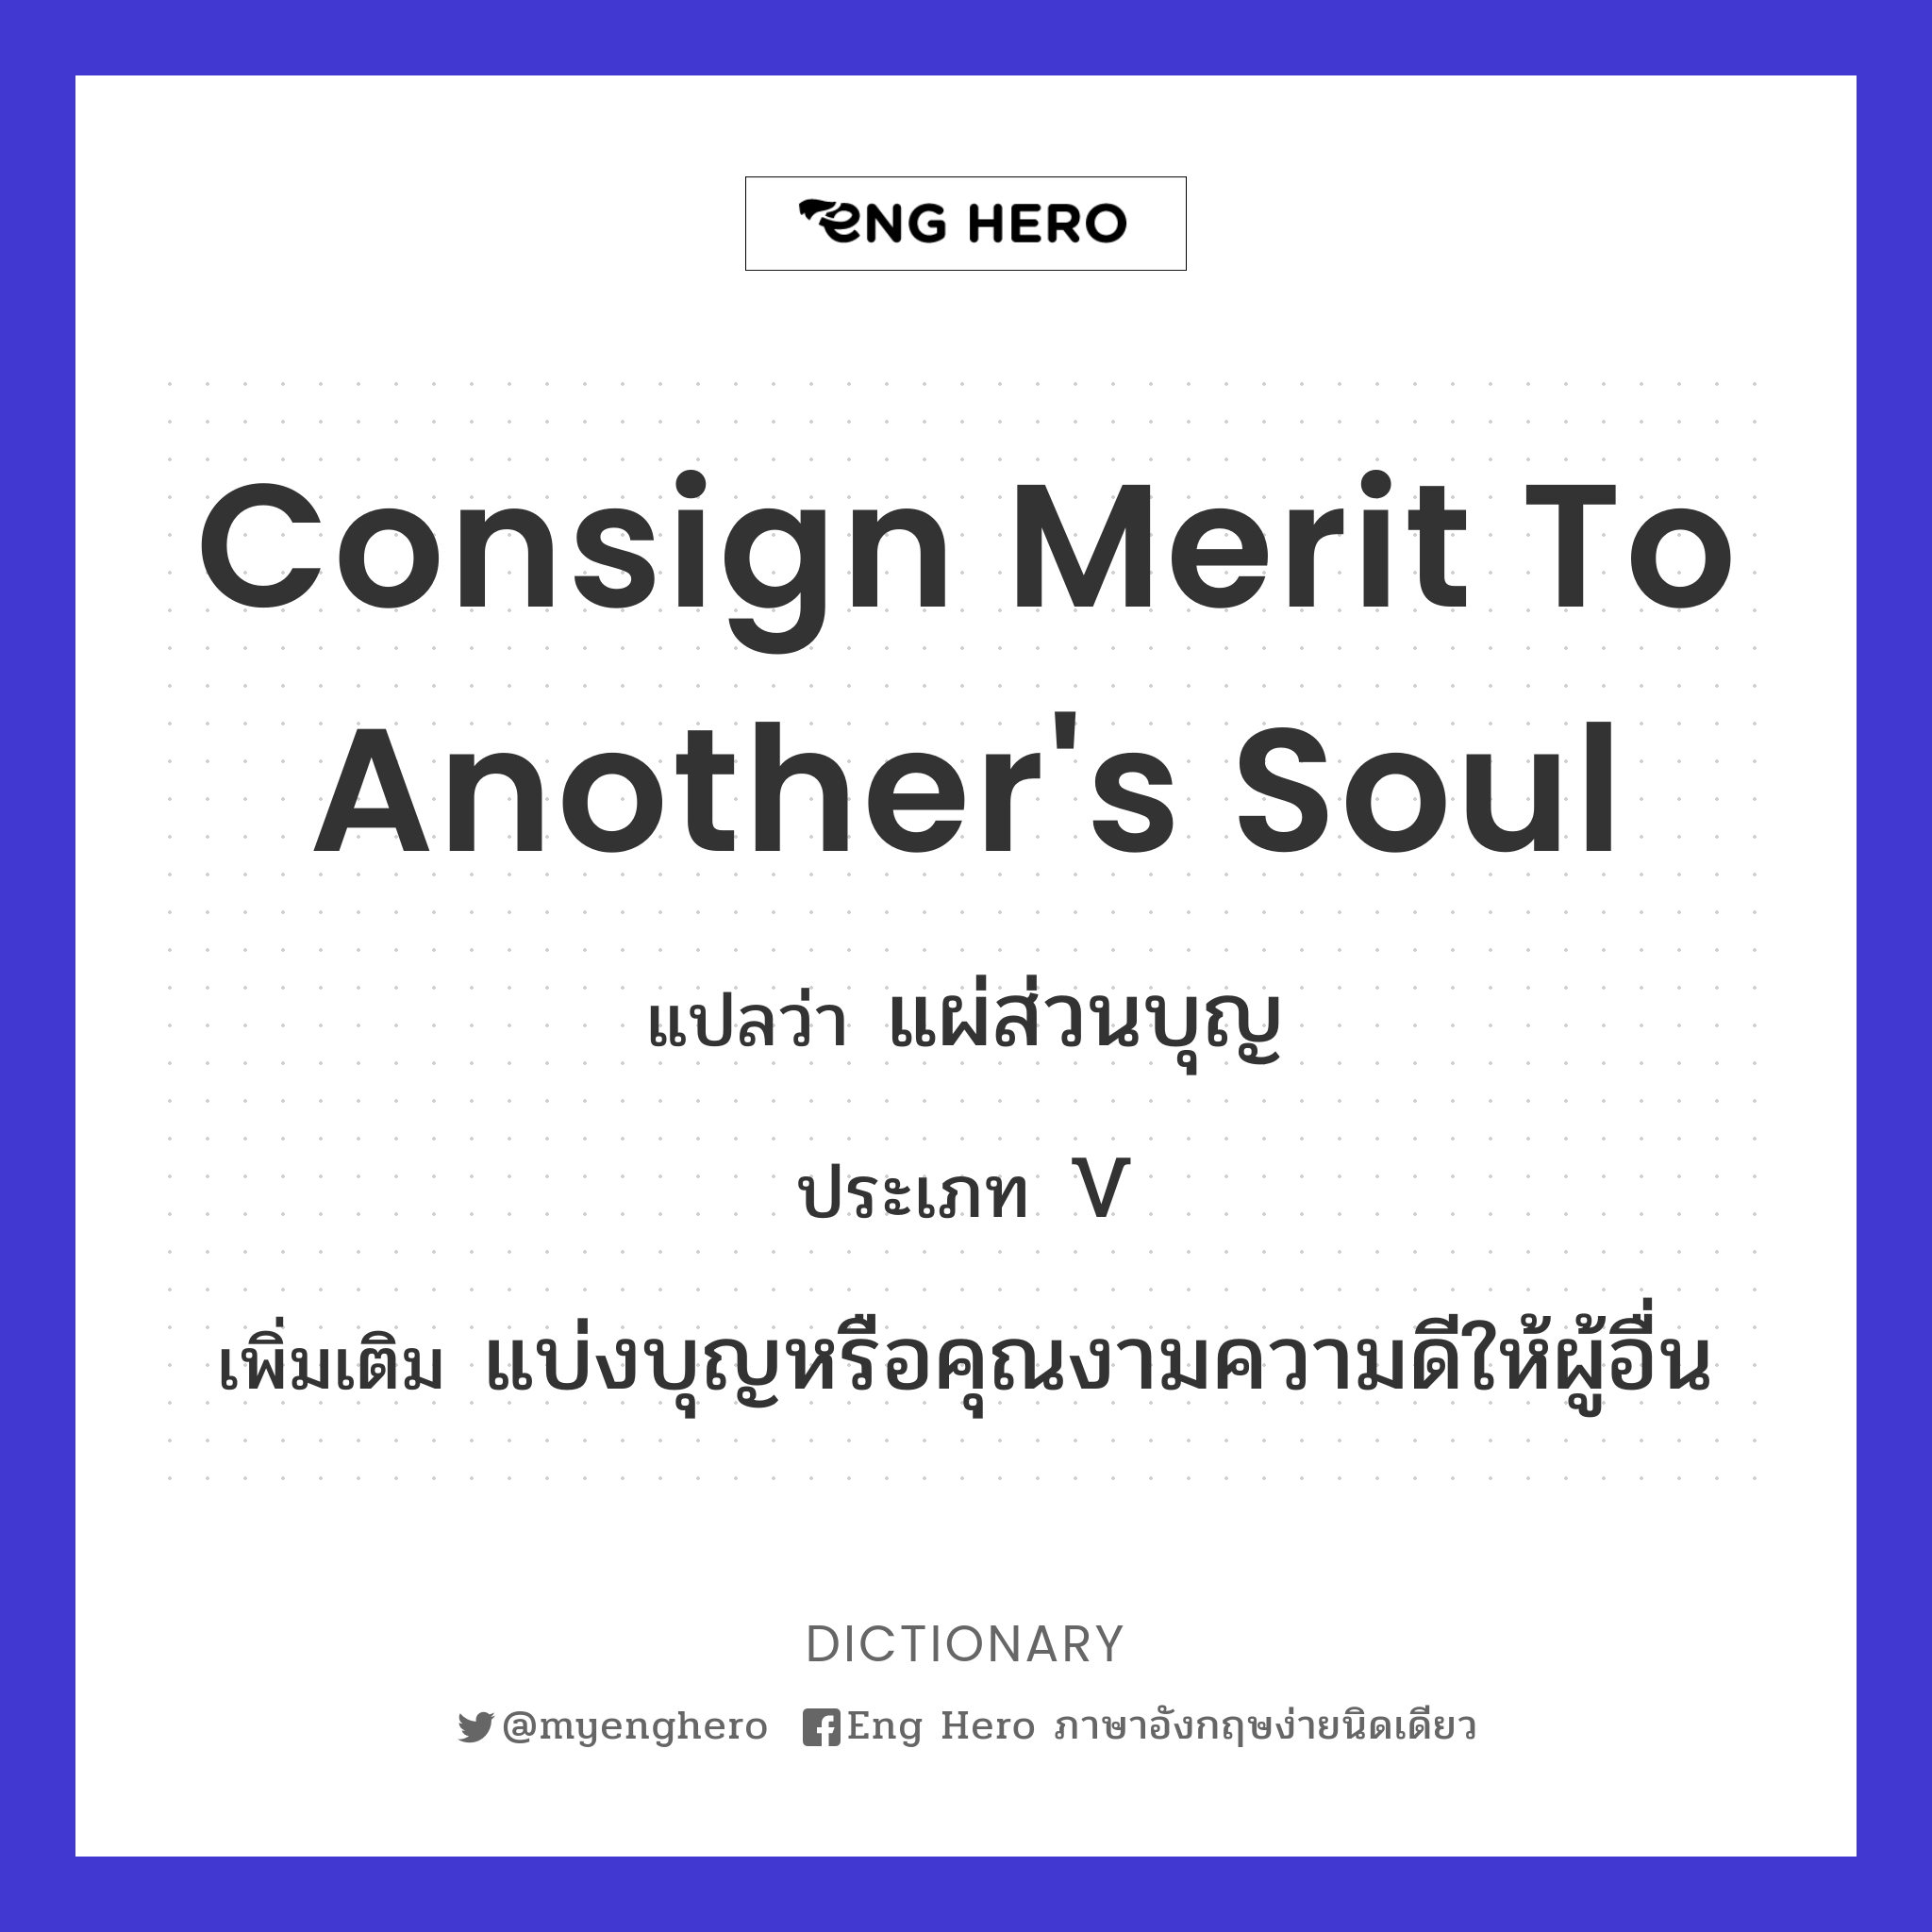 consign merit to another's soul